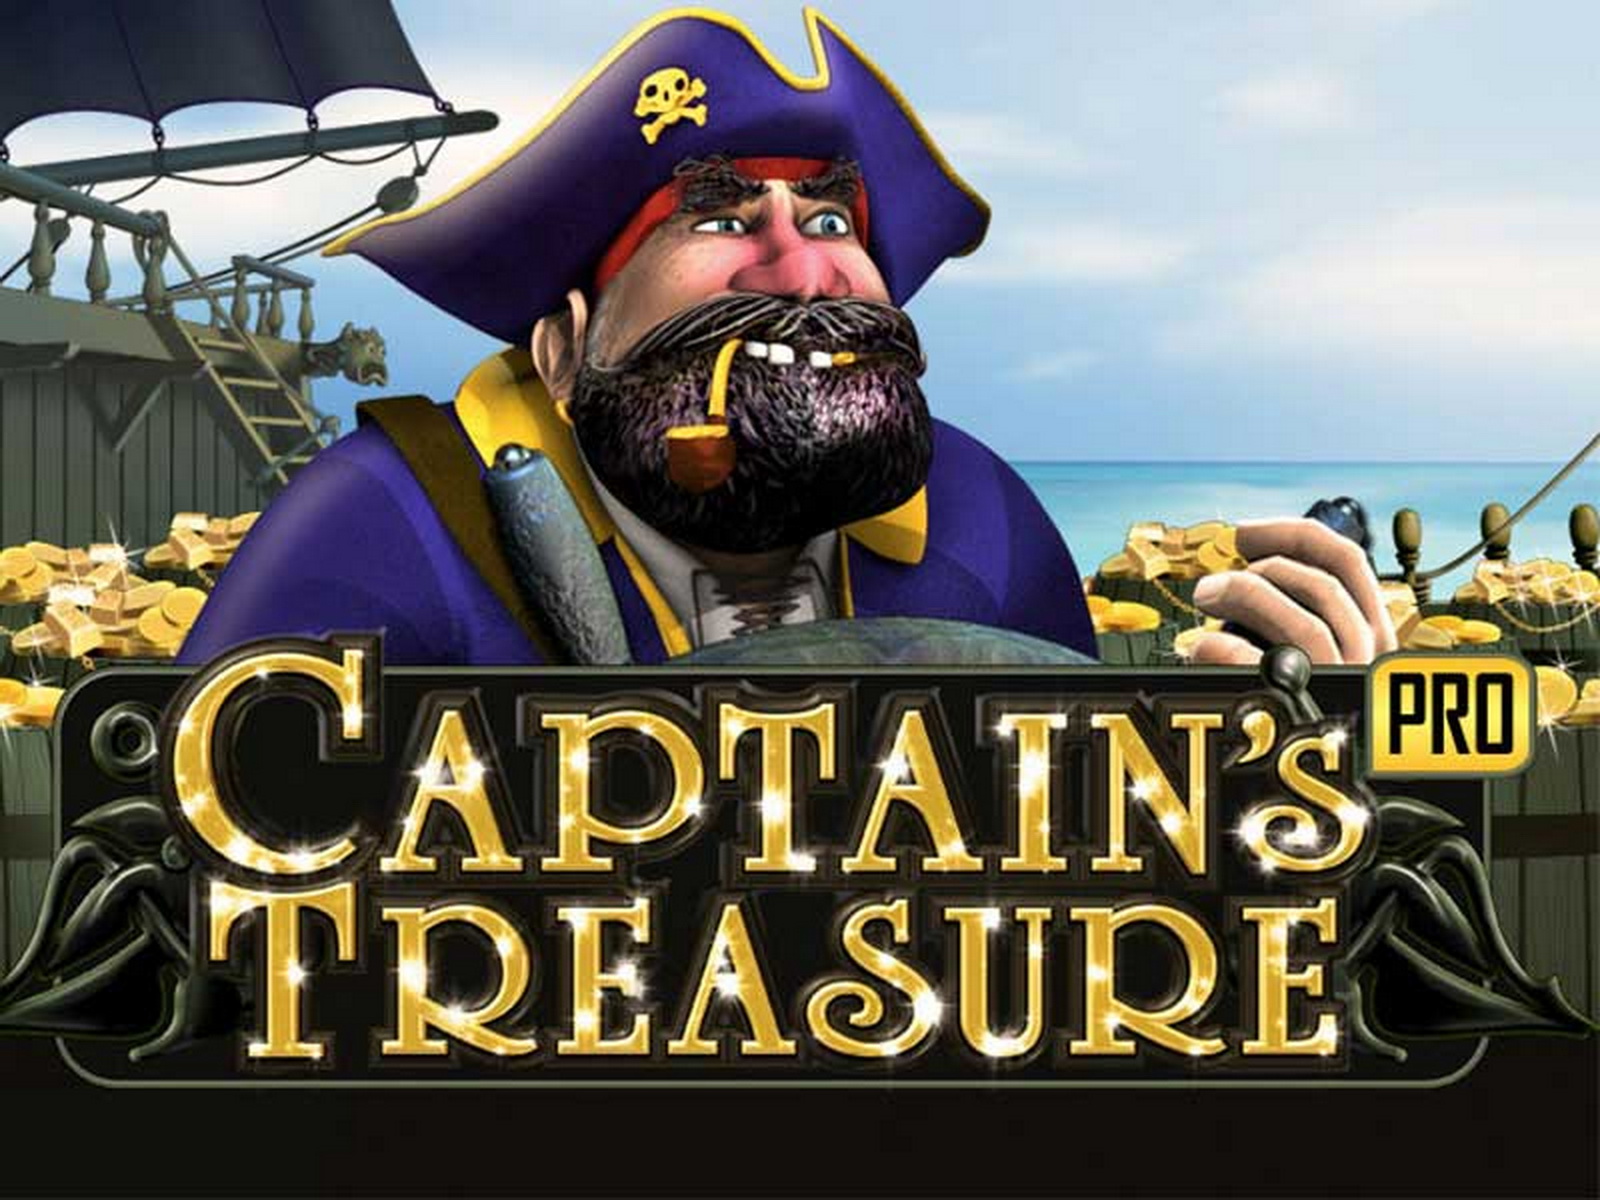 The Captain's Treasure Online Slot Demo Game by Playtech